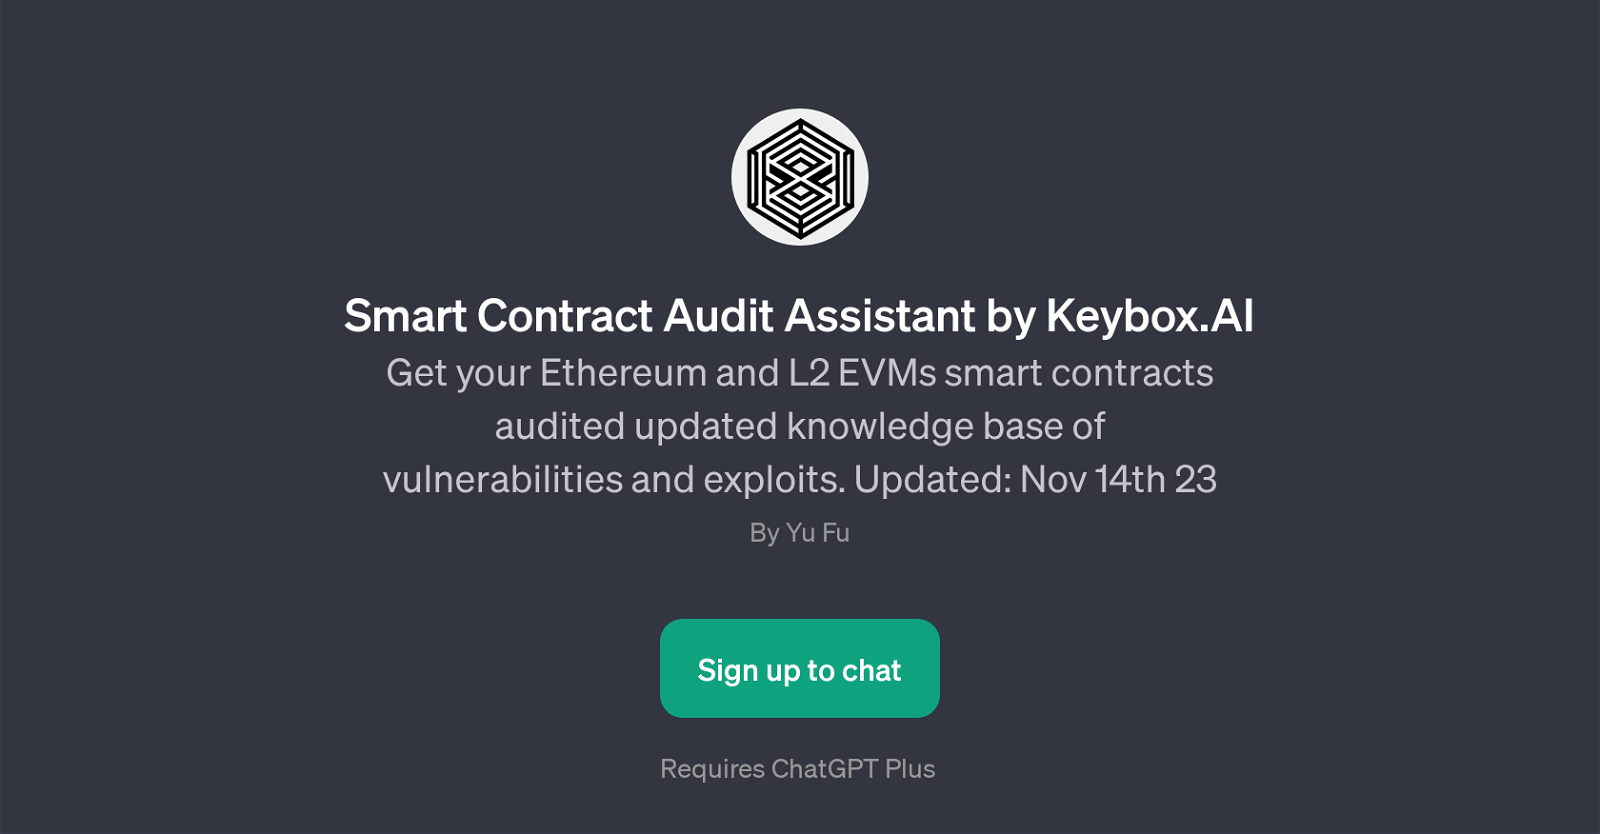 Smart Contract Audit Assistant by Keybox.AI website